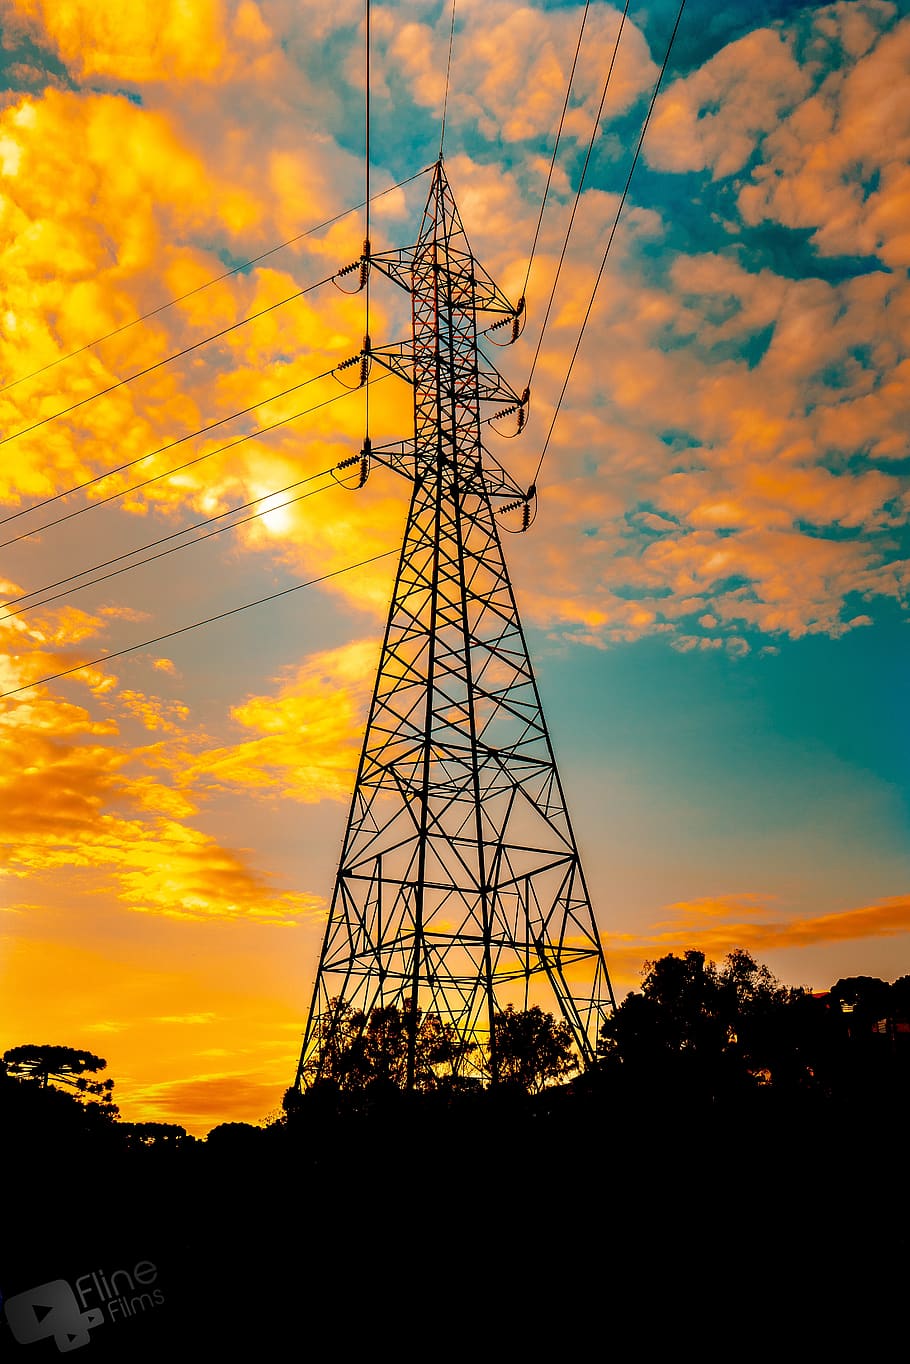 transmission, tower, electricity, clouds, energy, landscape